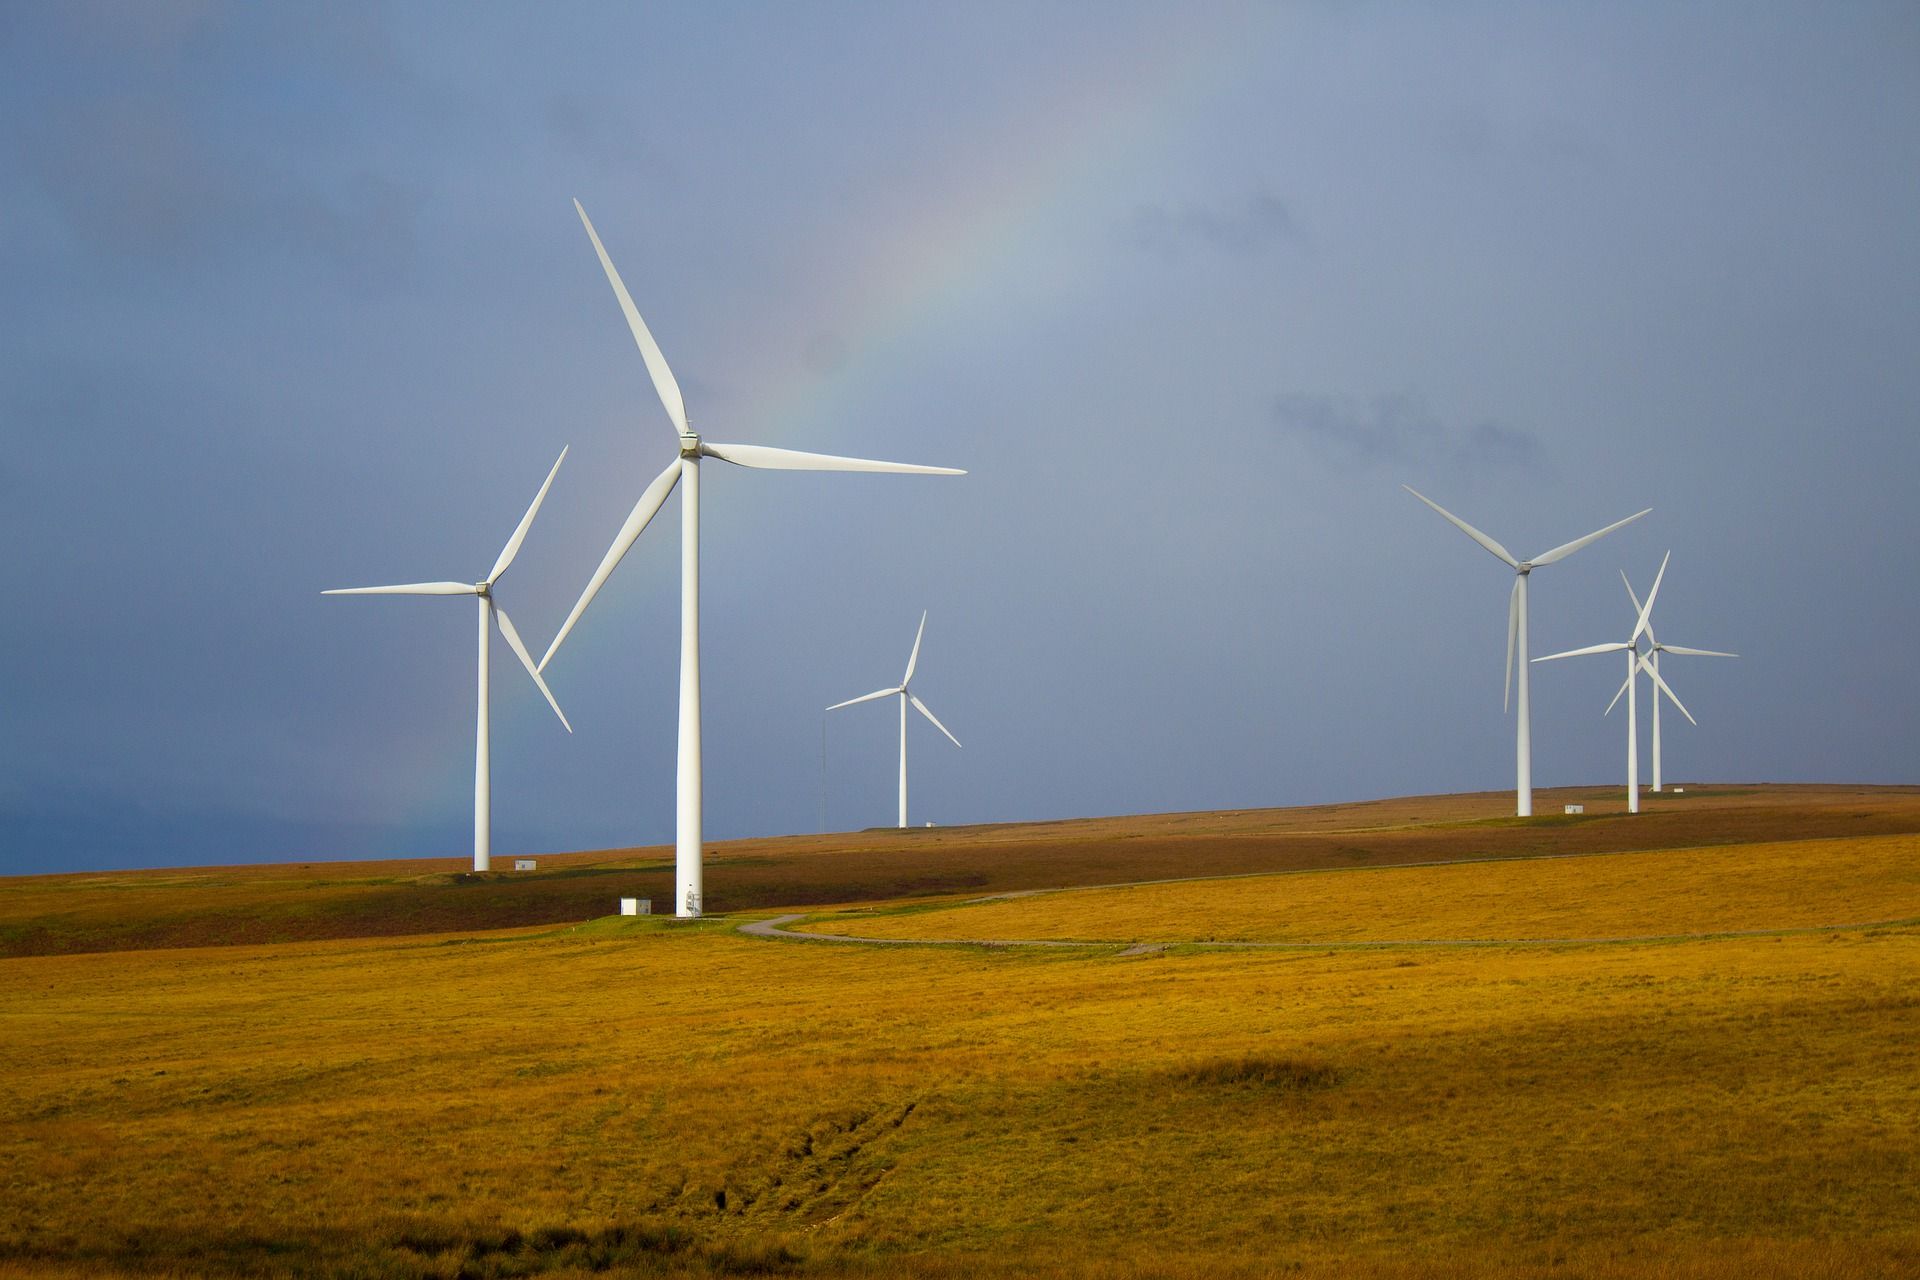 Latest EEA study finds multiple benefits of switch to renewable electricity